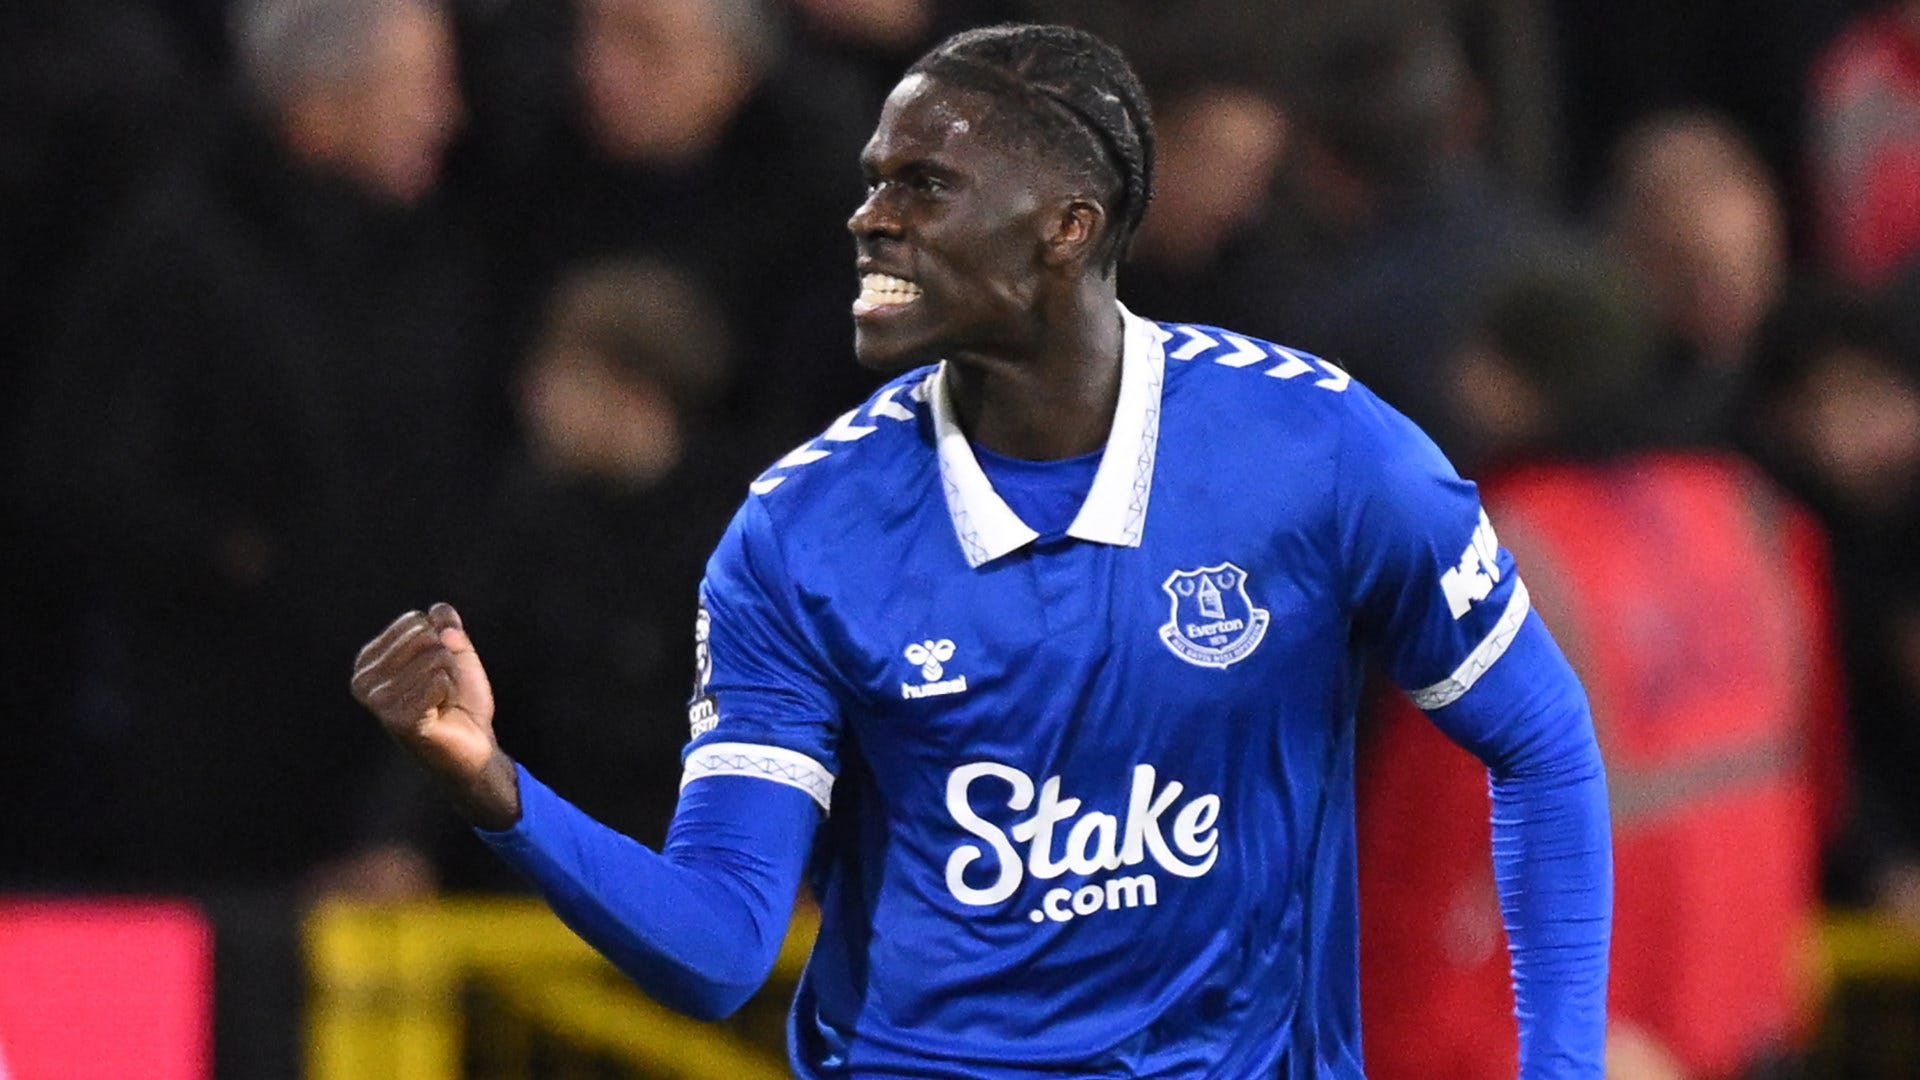 Man Utd plotting £48m winter transfer swoop for Everton midfielder Amadou Onana after rapid Casemiro decline - but will face stiff competition from Barcelona | Goal.com US